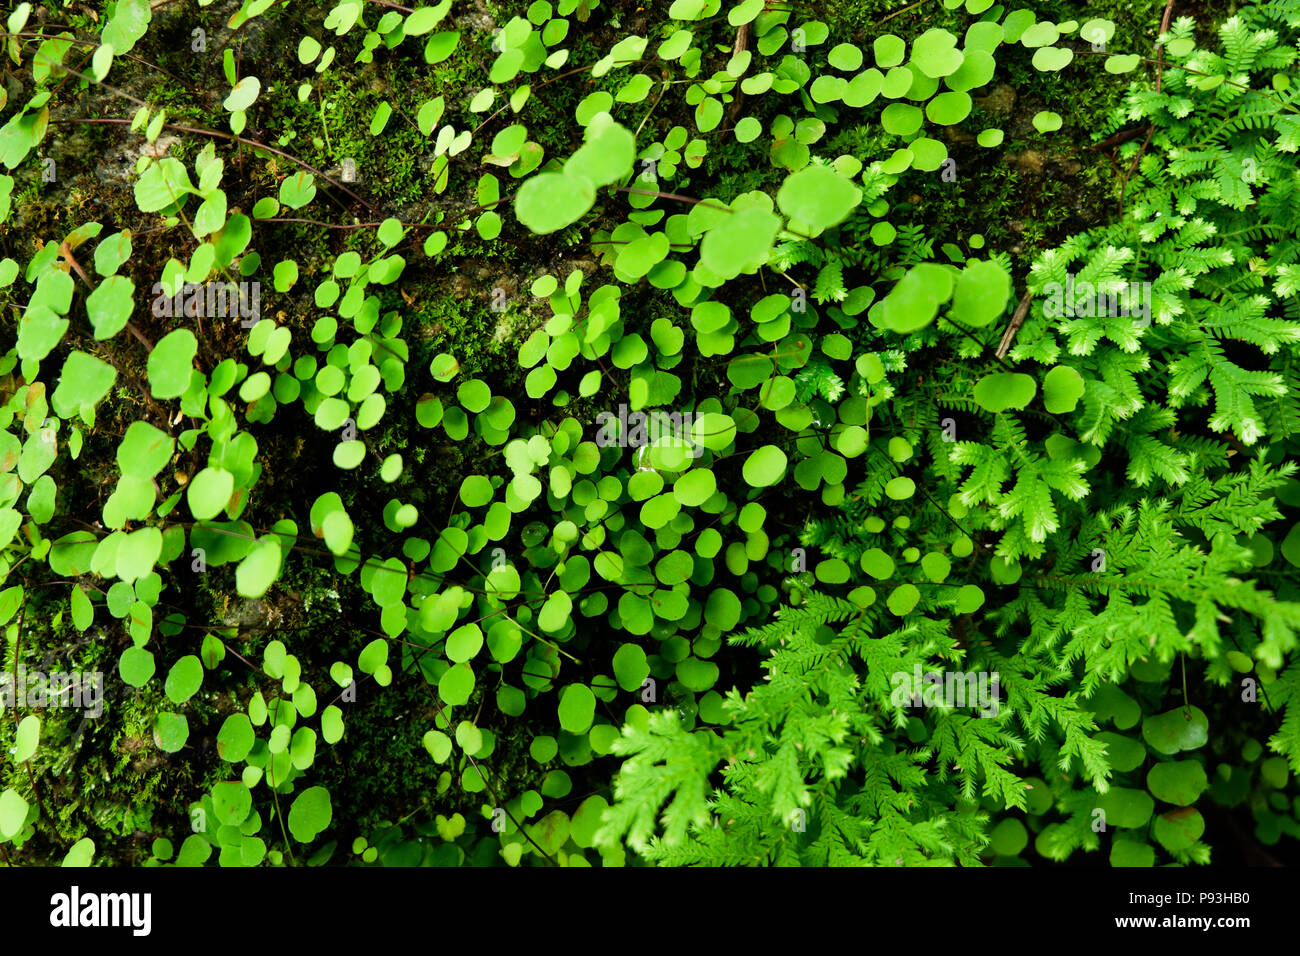 Close-up of Freshness Selaginella involvens fern, small fern leaves growing in the rain forest Stock Photo